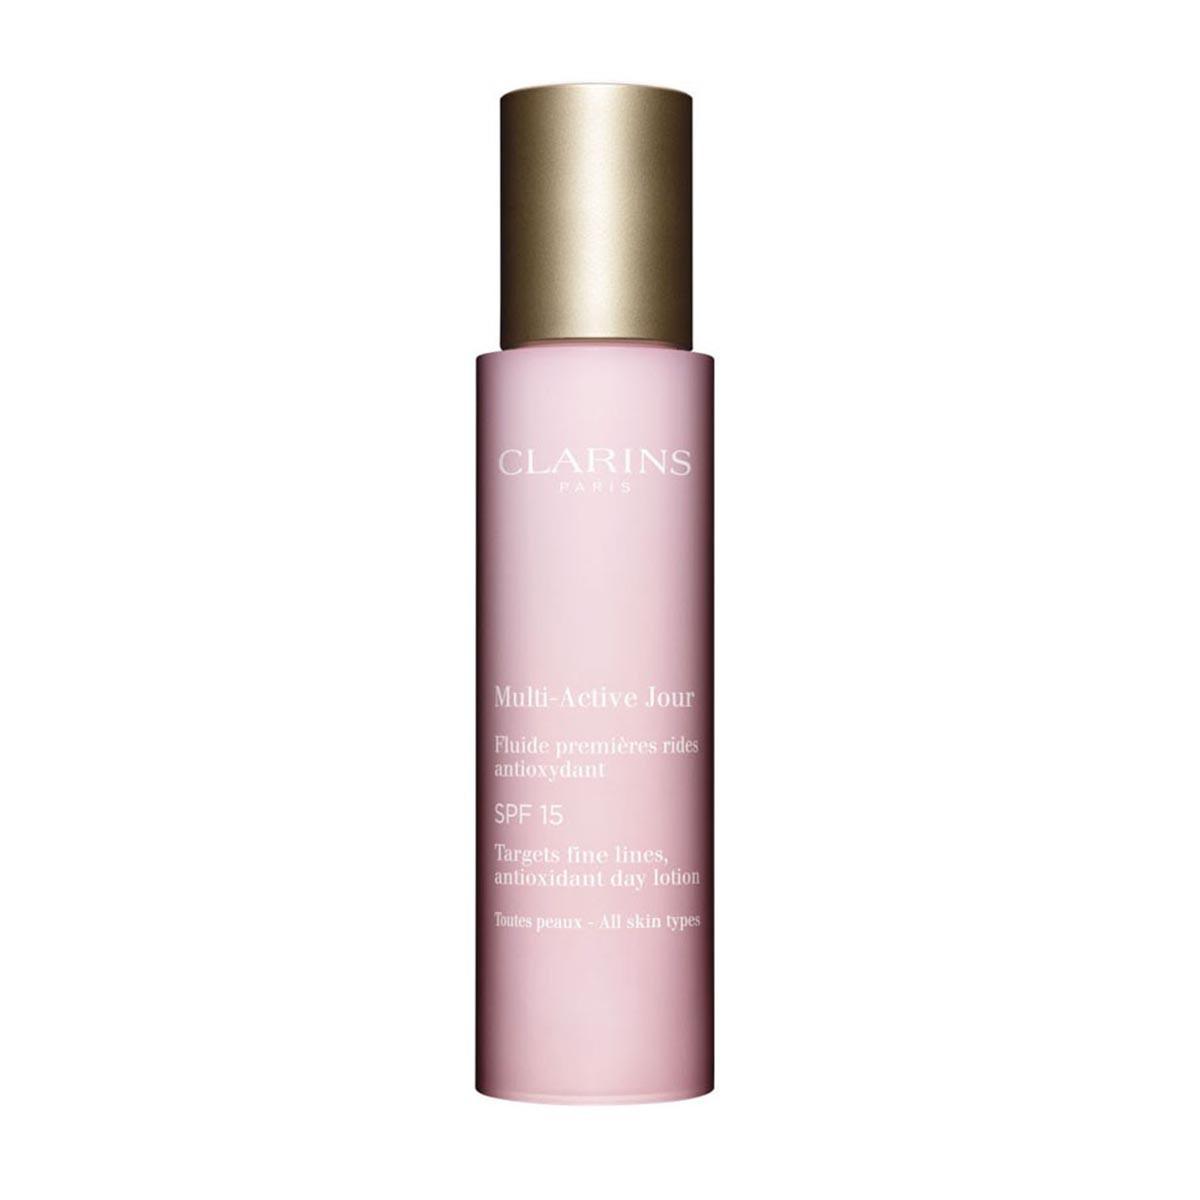 clarins-multiactive-antioxidant-day-lotion-spf15-all-skin-types-50ml